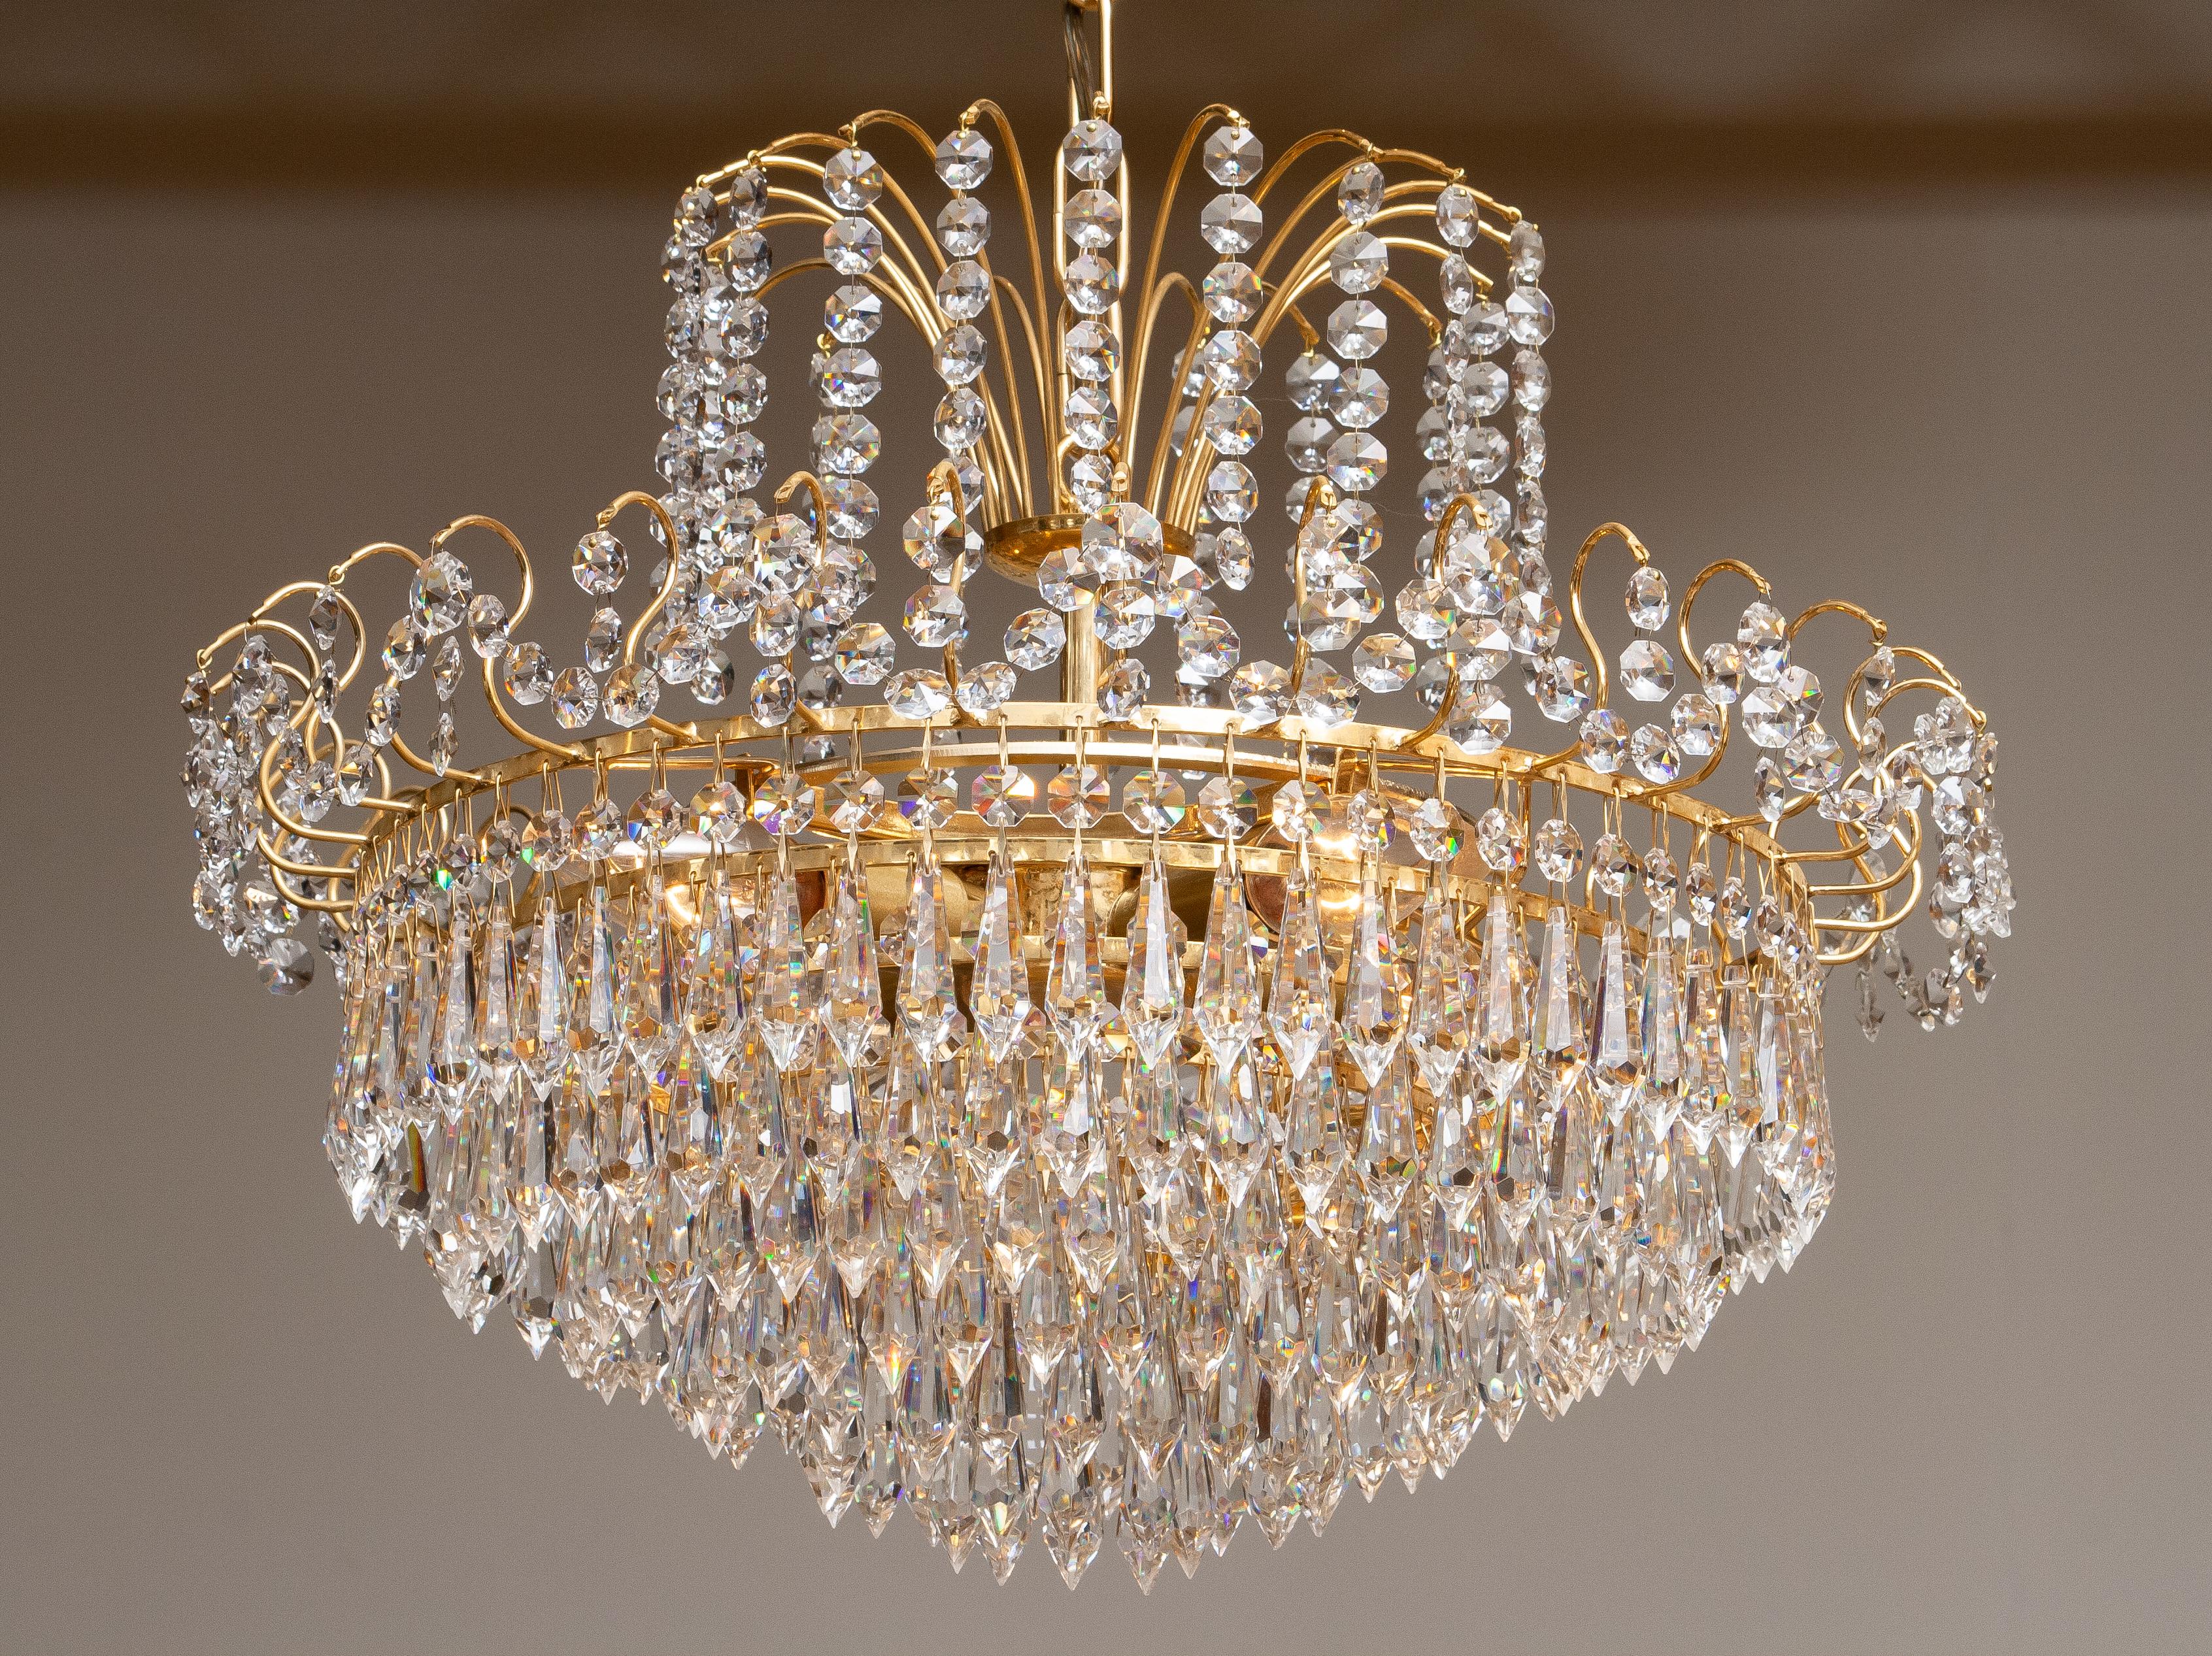 Late 20th Century 1970s, Gold-Plated and Faceted Crystal Chandelier Attributed to Rejmyre, Sweden